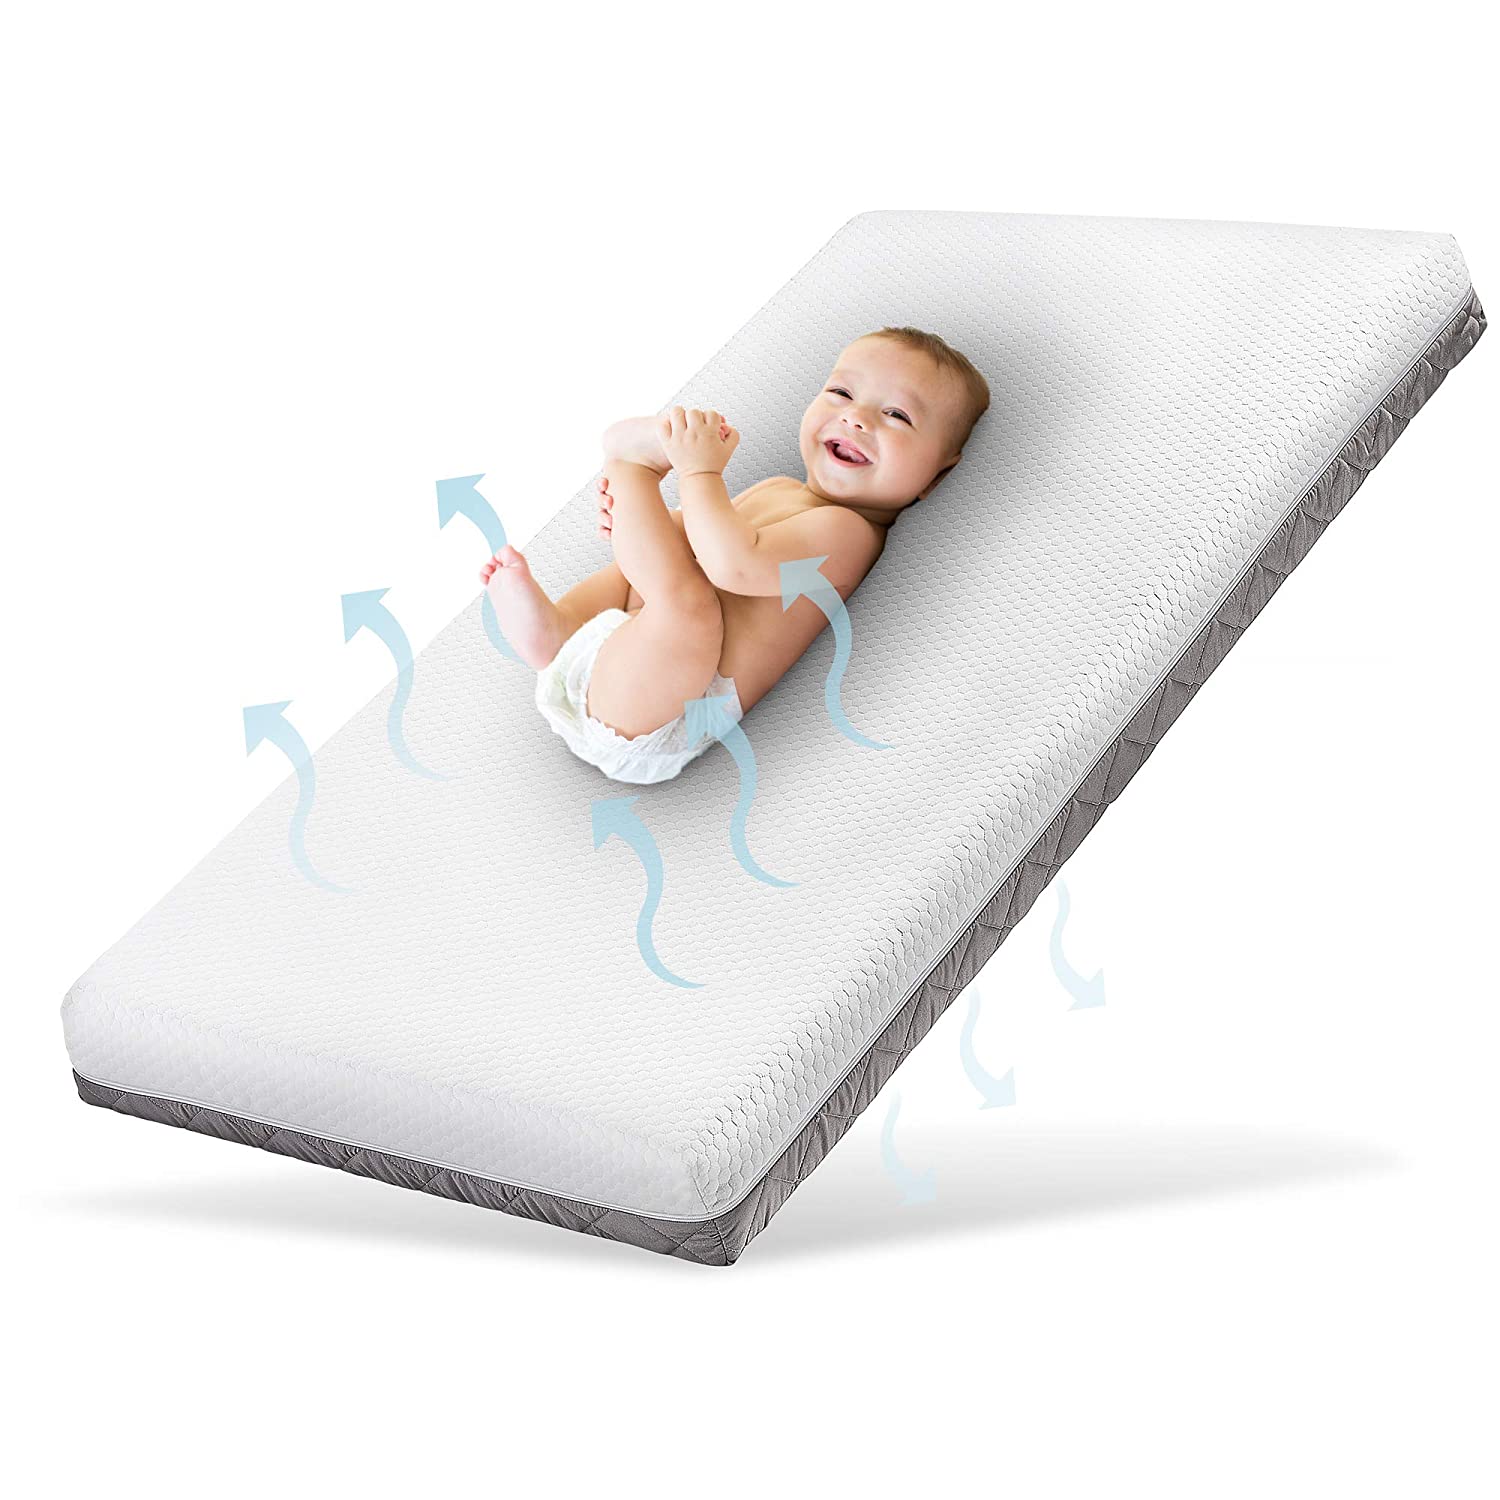 Ehrenkind® Royal Baby Mattress 70 x 140 cm Children\'s Mattress 70 x 140 cm with Innovative 3D Mesh and Hygiene Tencel Cover Waterproof and Breathable